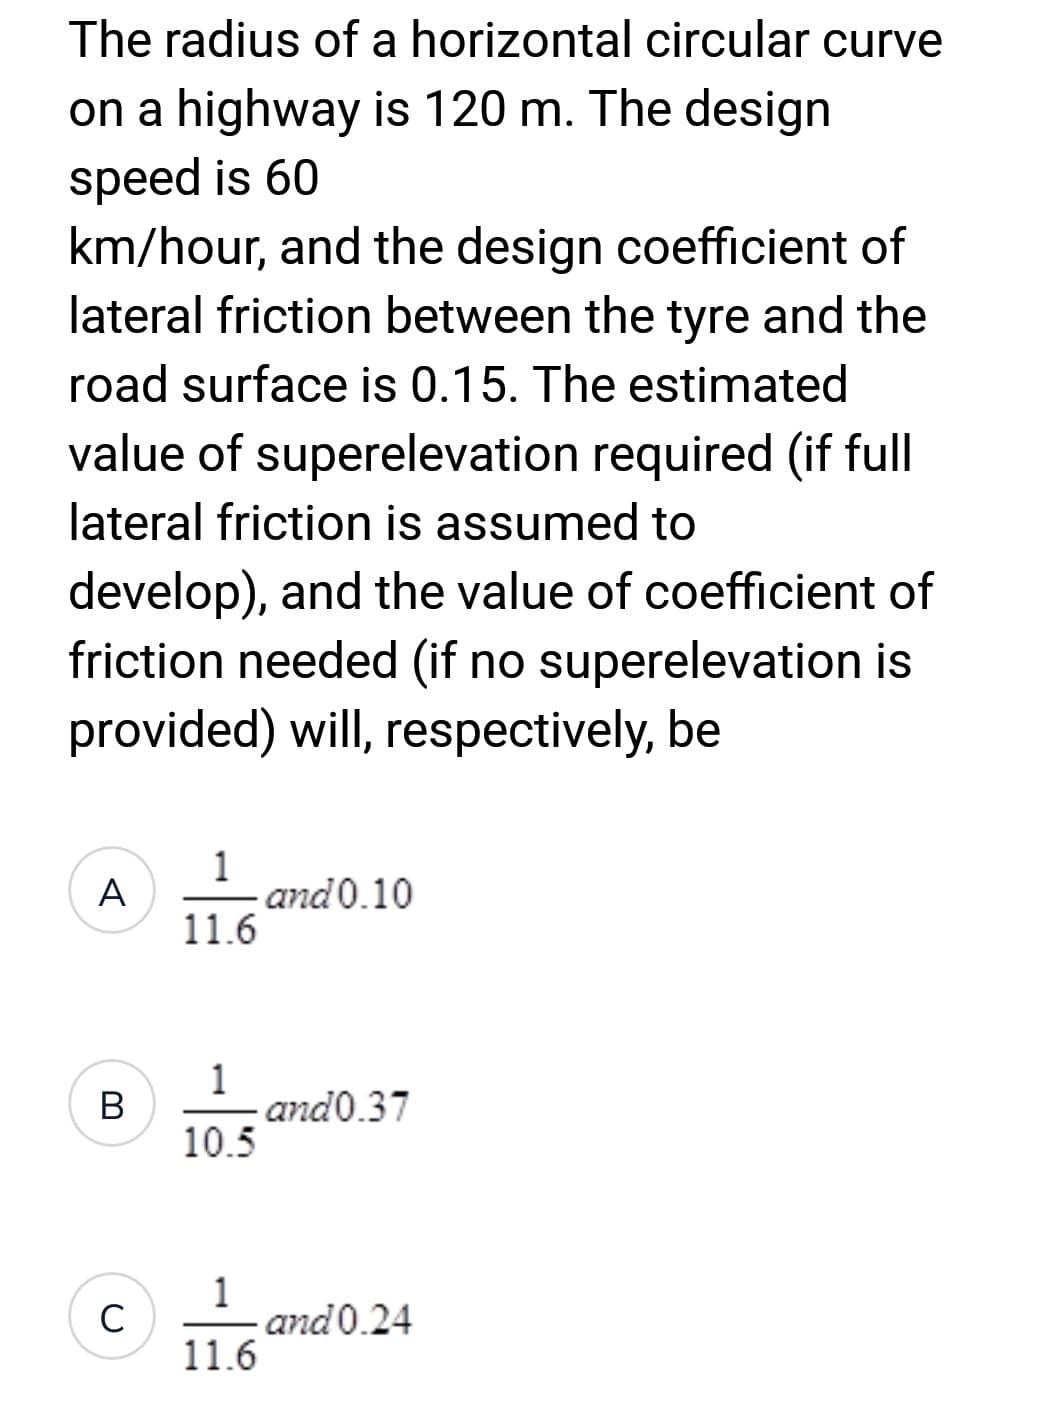 The radius of a horizontal circular curve
on a highway is 120 m. The design
speed is 60
km/hour, and the design coefficient of
lateral friction between the tyre and the
road surface is 0.15. The estimated
value of superelevation required (if full
lateral friction is assumed to
develop), and the value of coefficient of
friction needed (if no superelevation is
provided) will, respectively, be
A
B
C
1
11.6
1
10.5
1
11.6
and 0.10
and 0.37
and 0.24